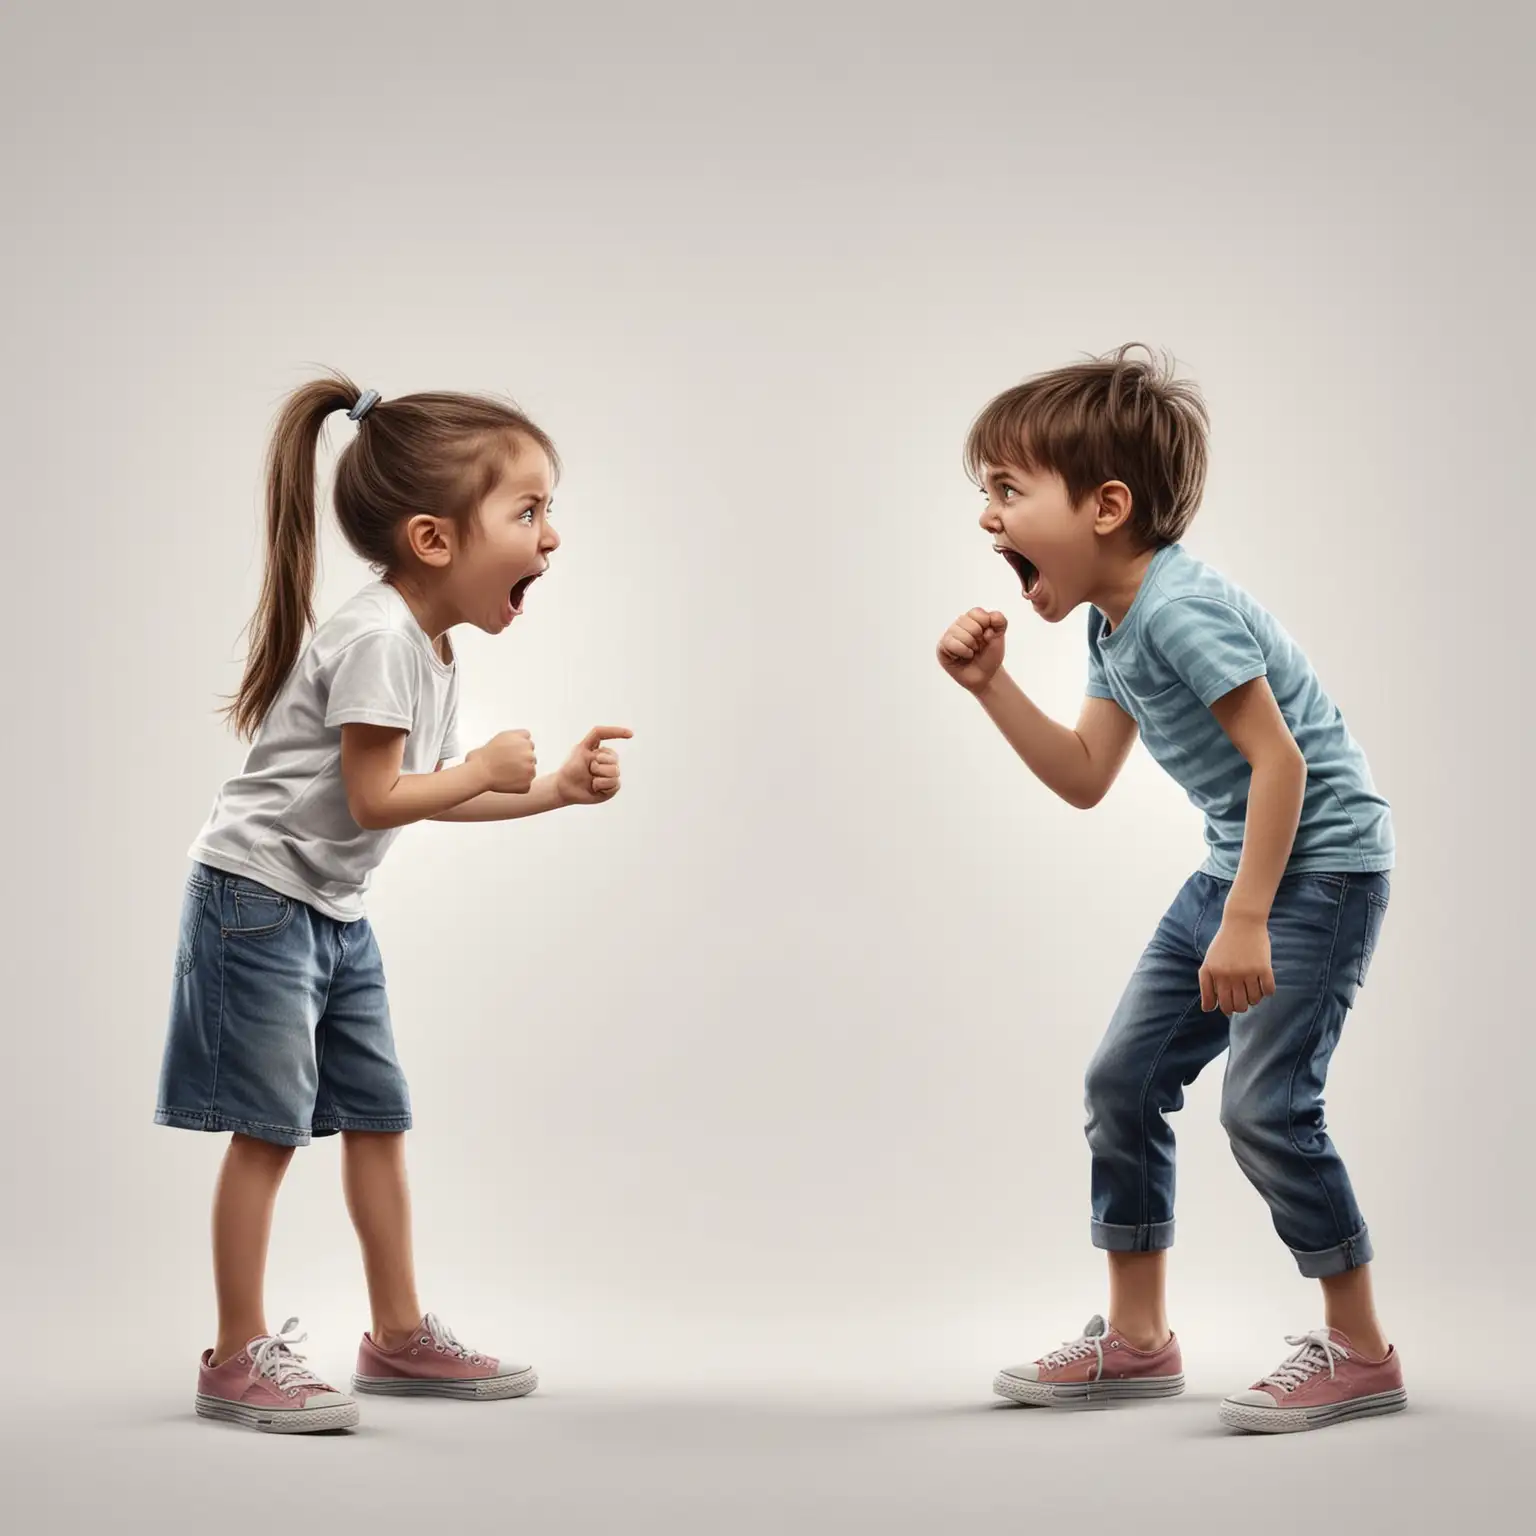 Children Arguing on White Background Realistic Sibling Conflict Scene